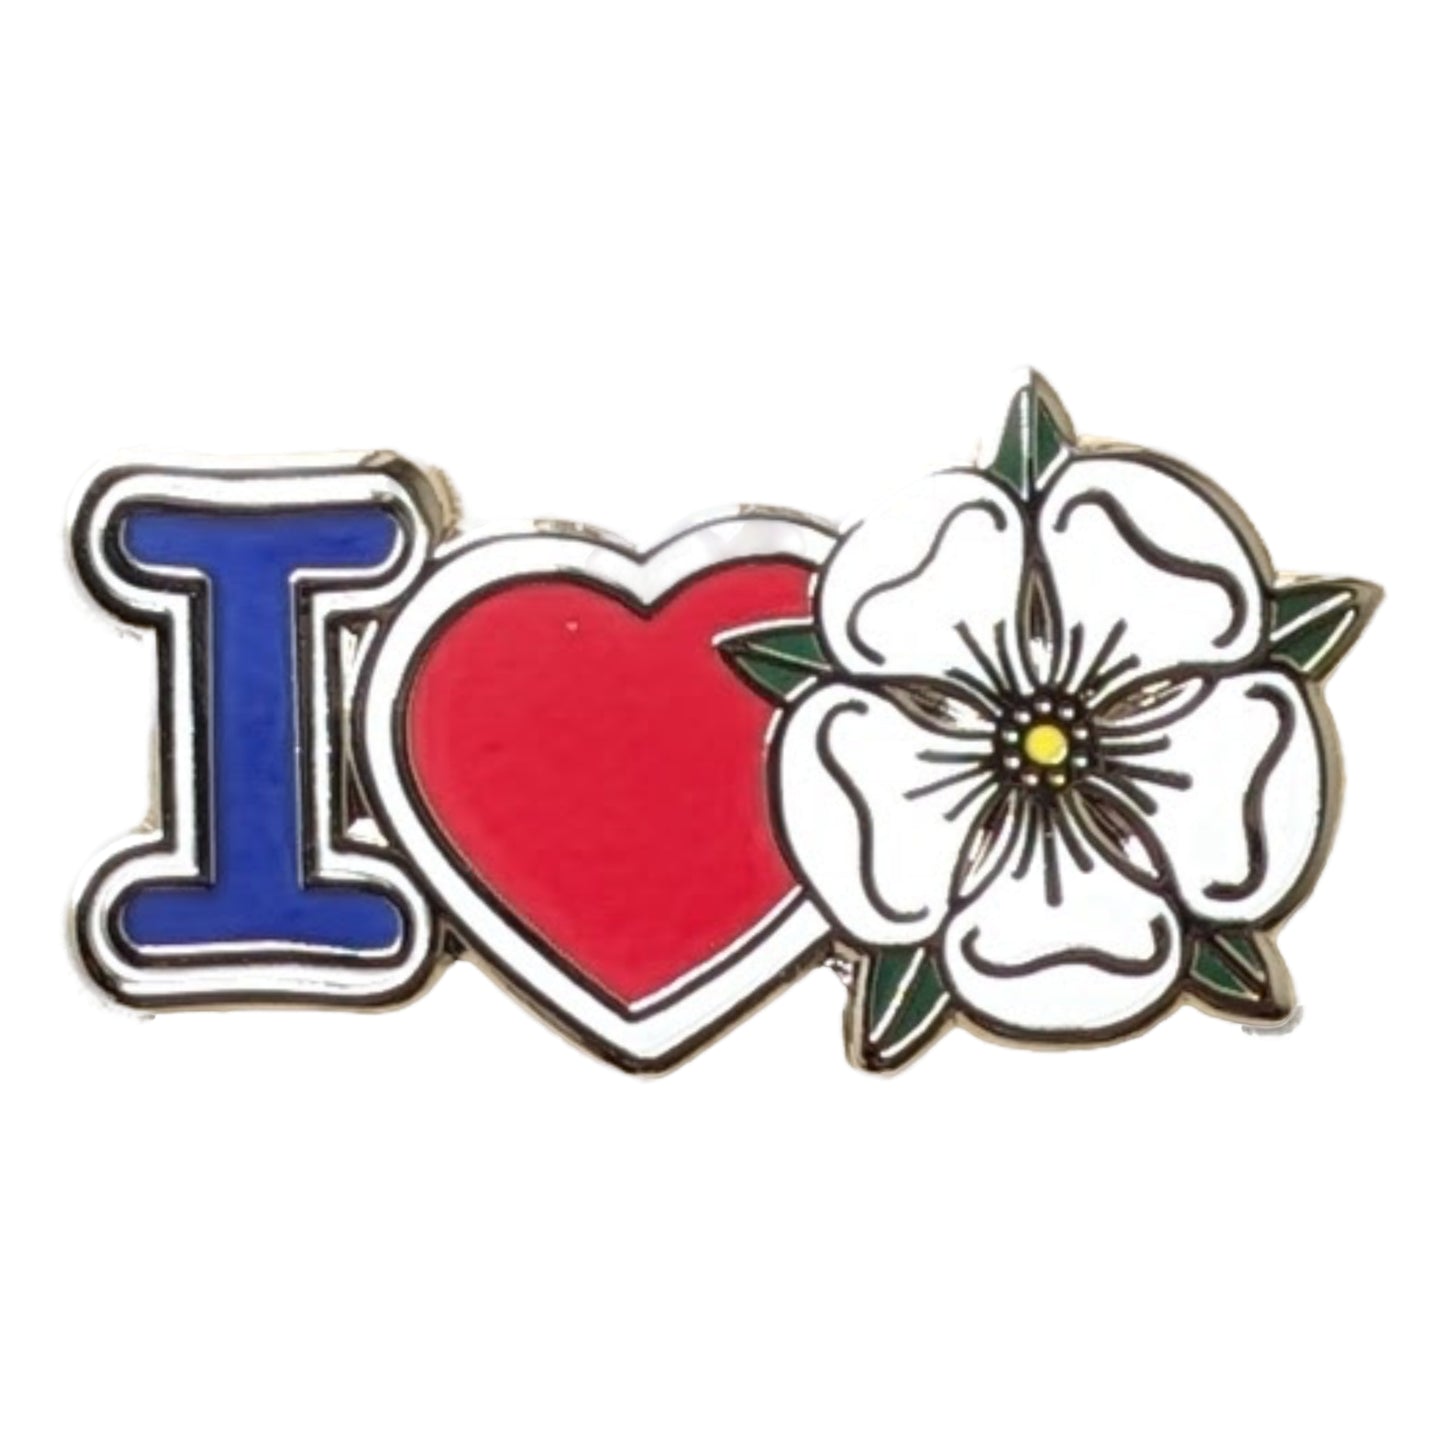 I Love Yorkshire White Rose Pin Badge - The Great Yorkshire Shop